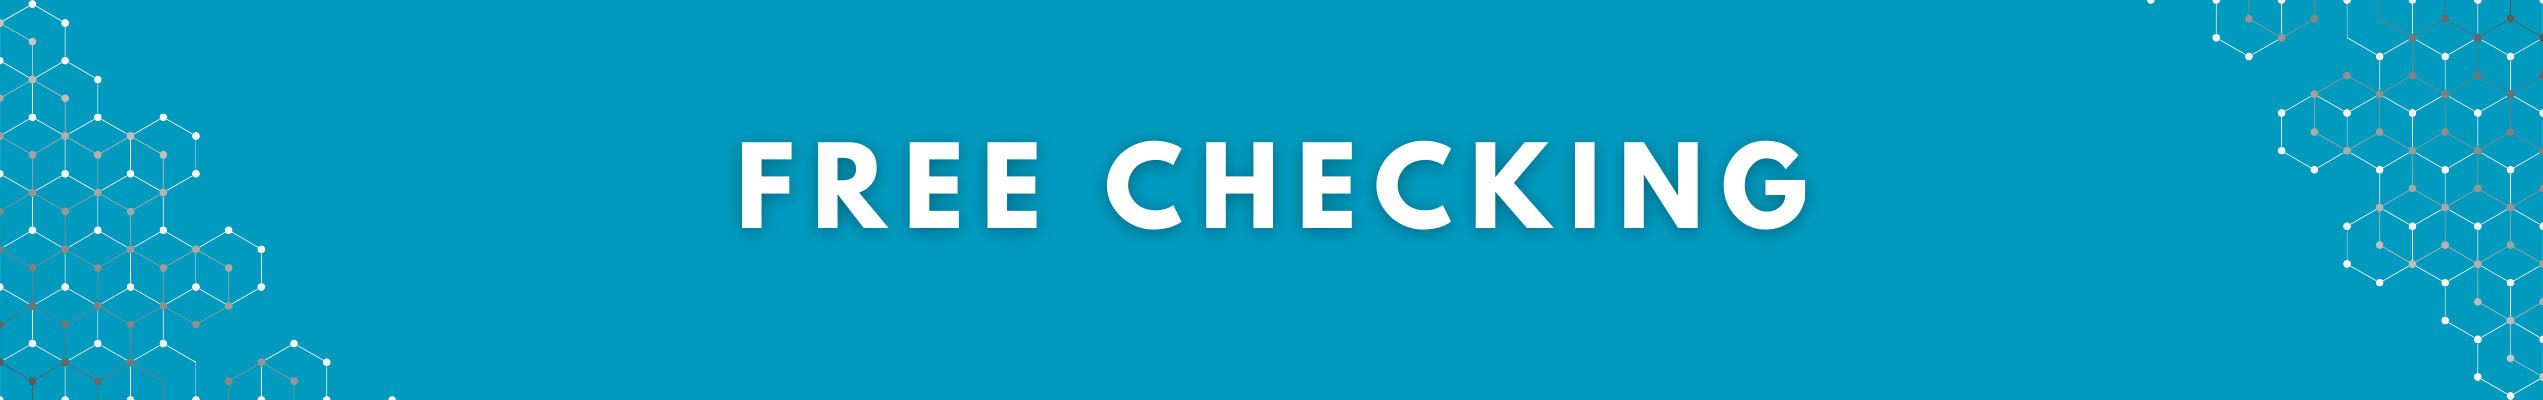 Get a truly free checking account for your everyday payment needs